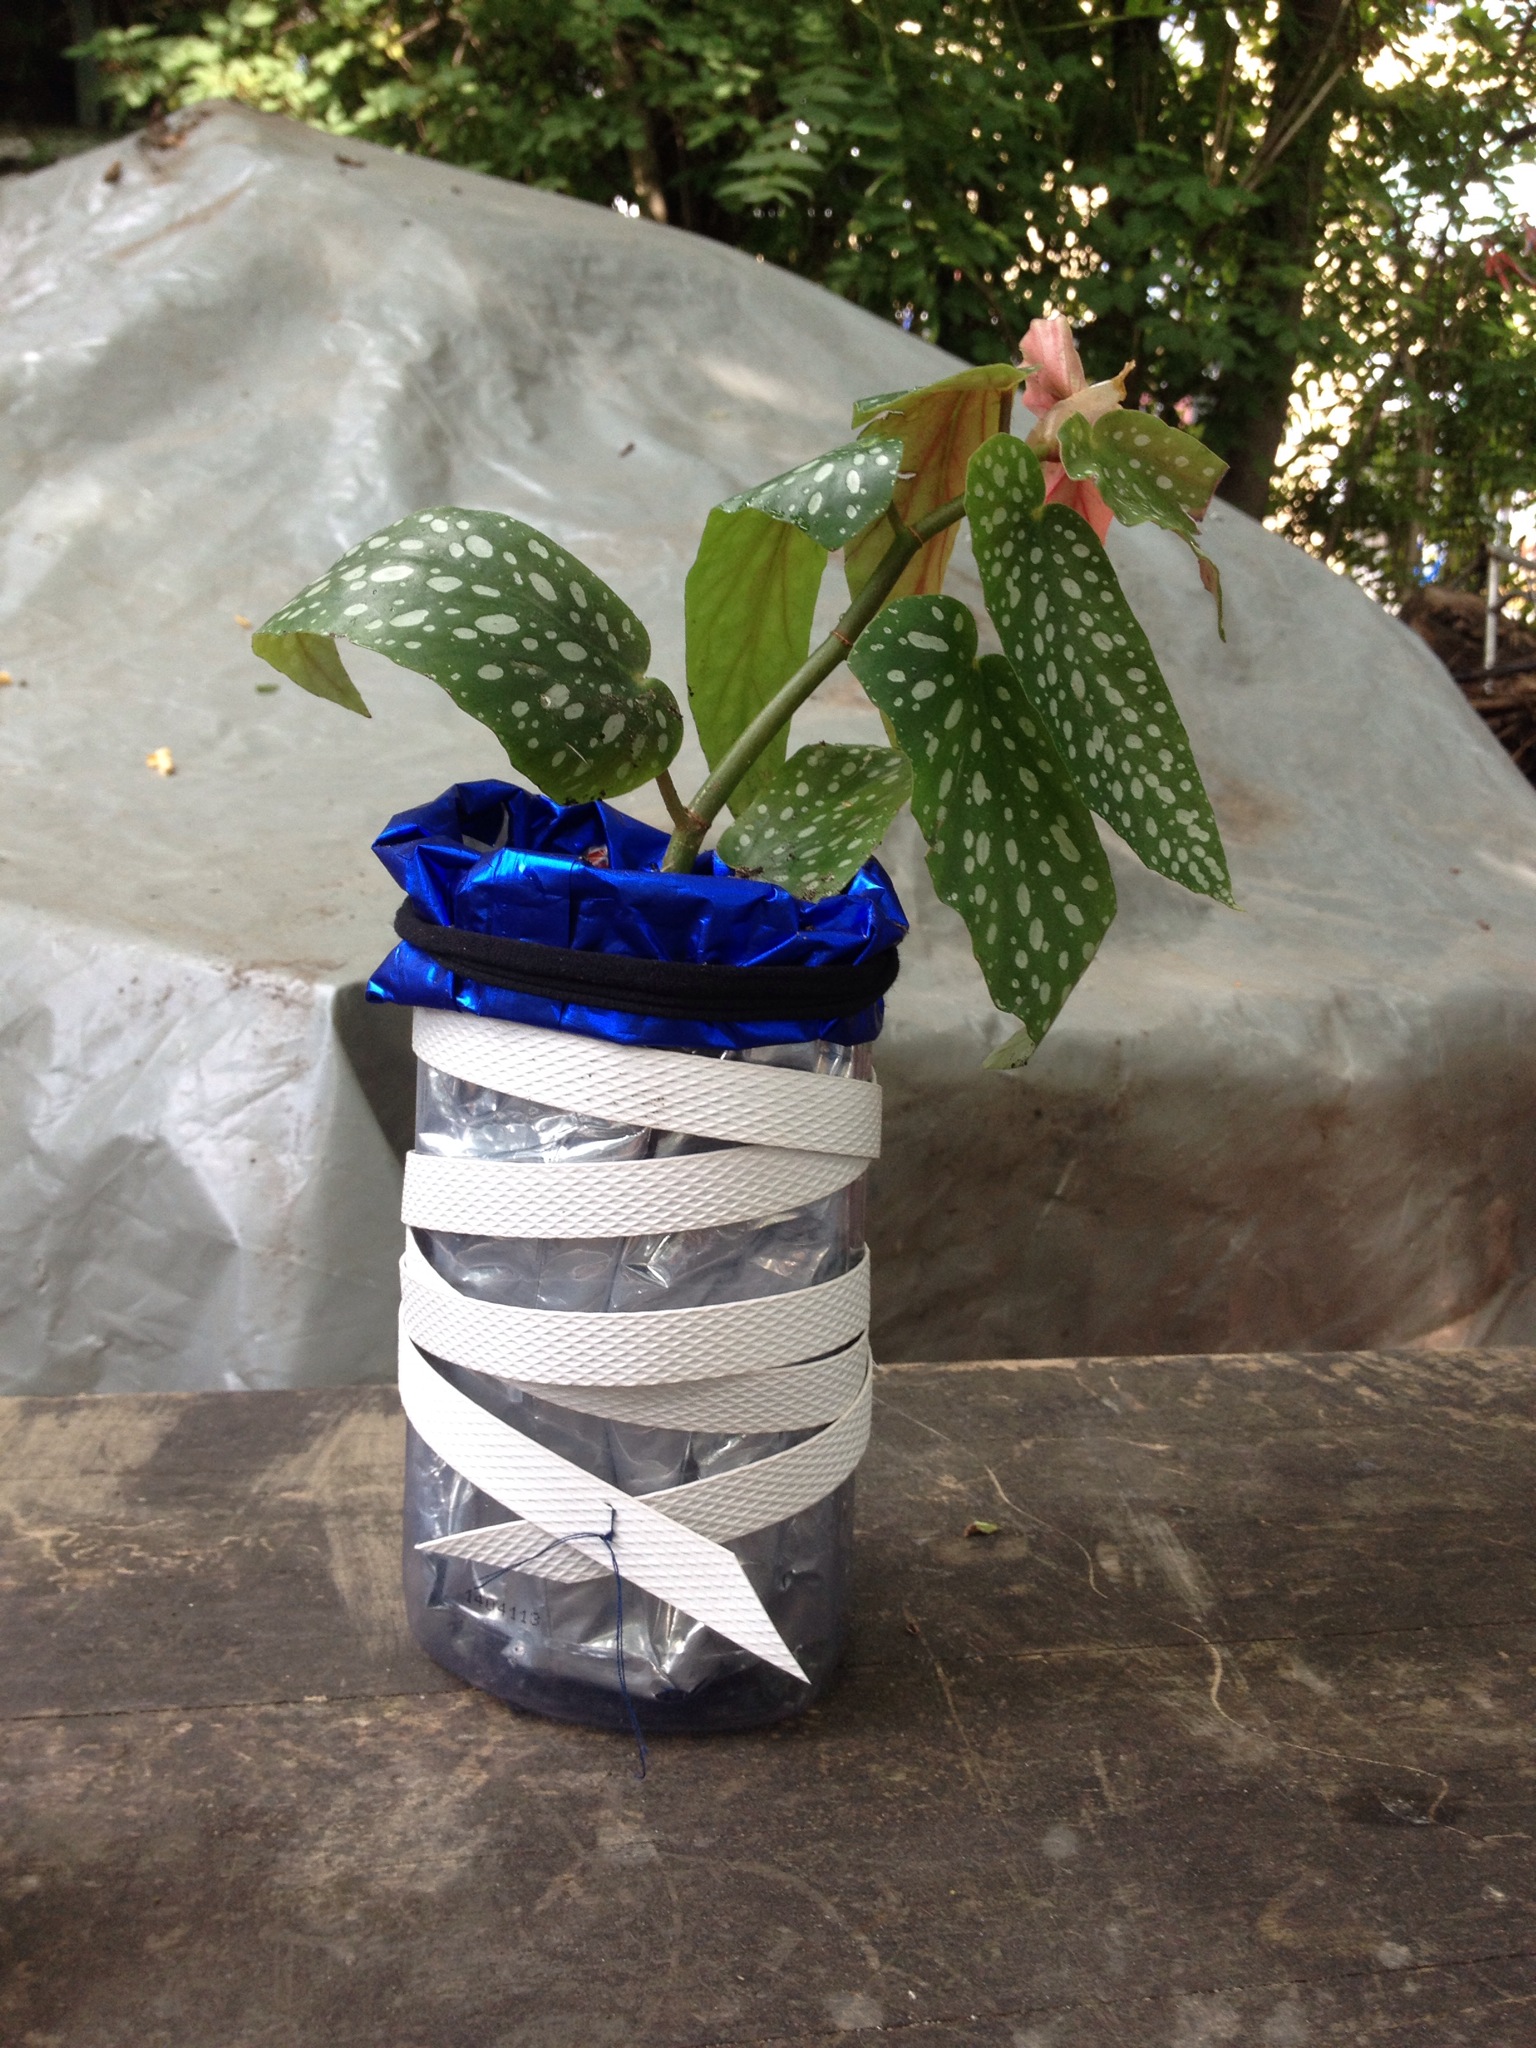 Flower pots from plastic waste - Creative Green Life